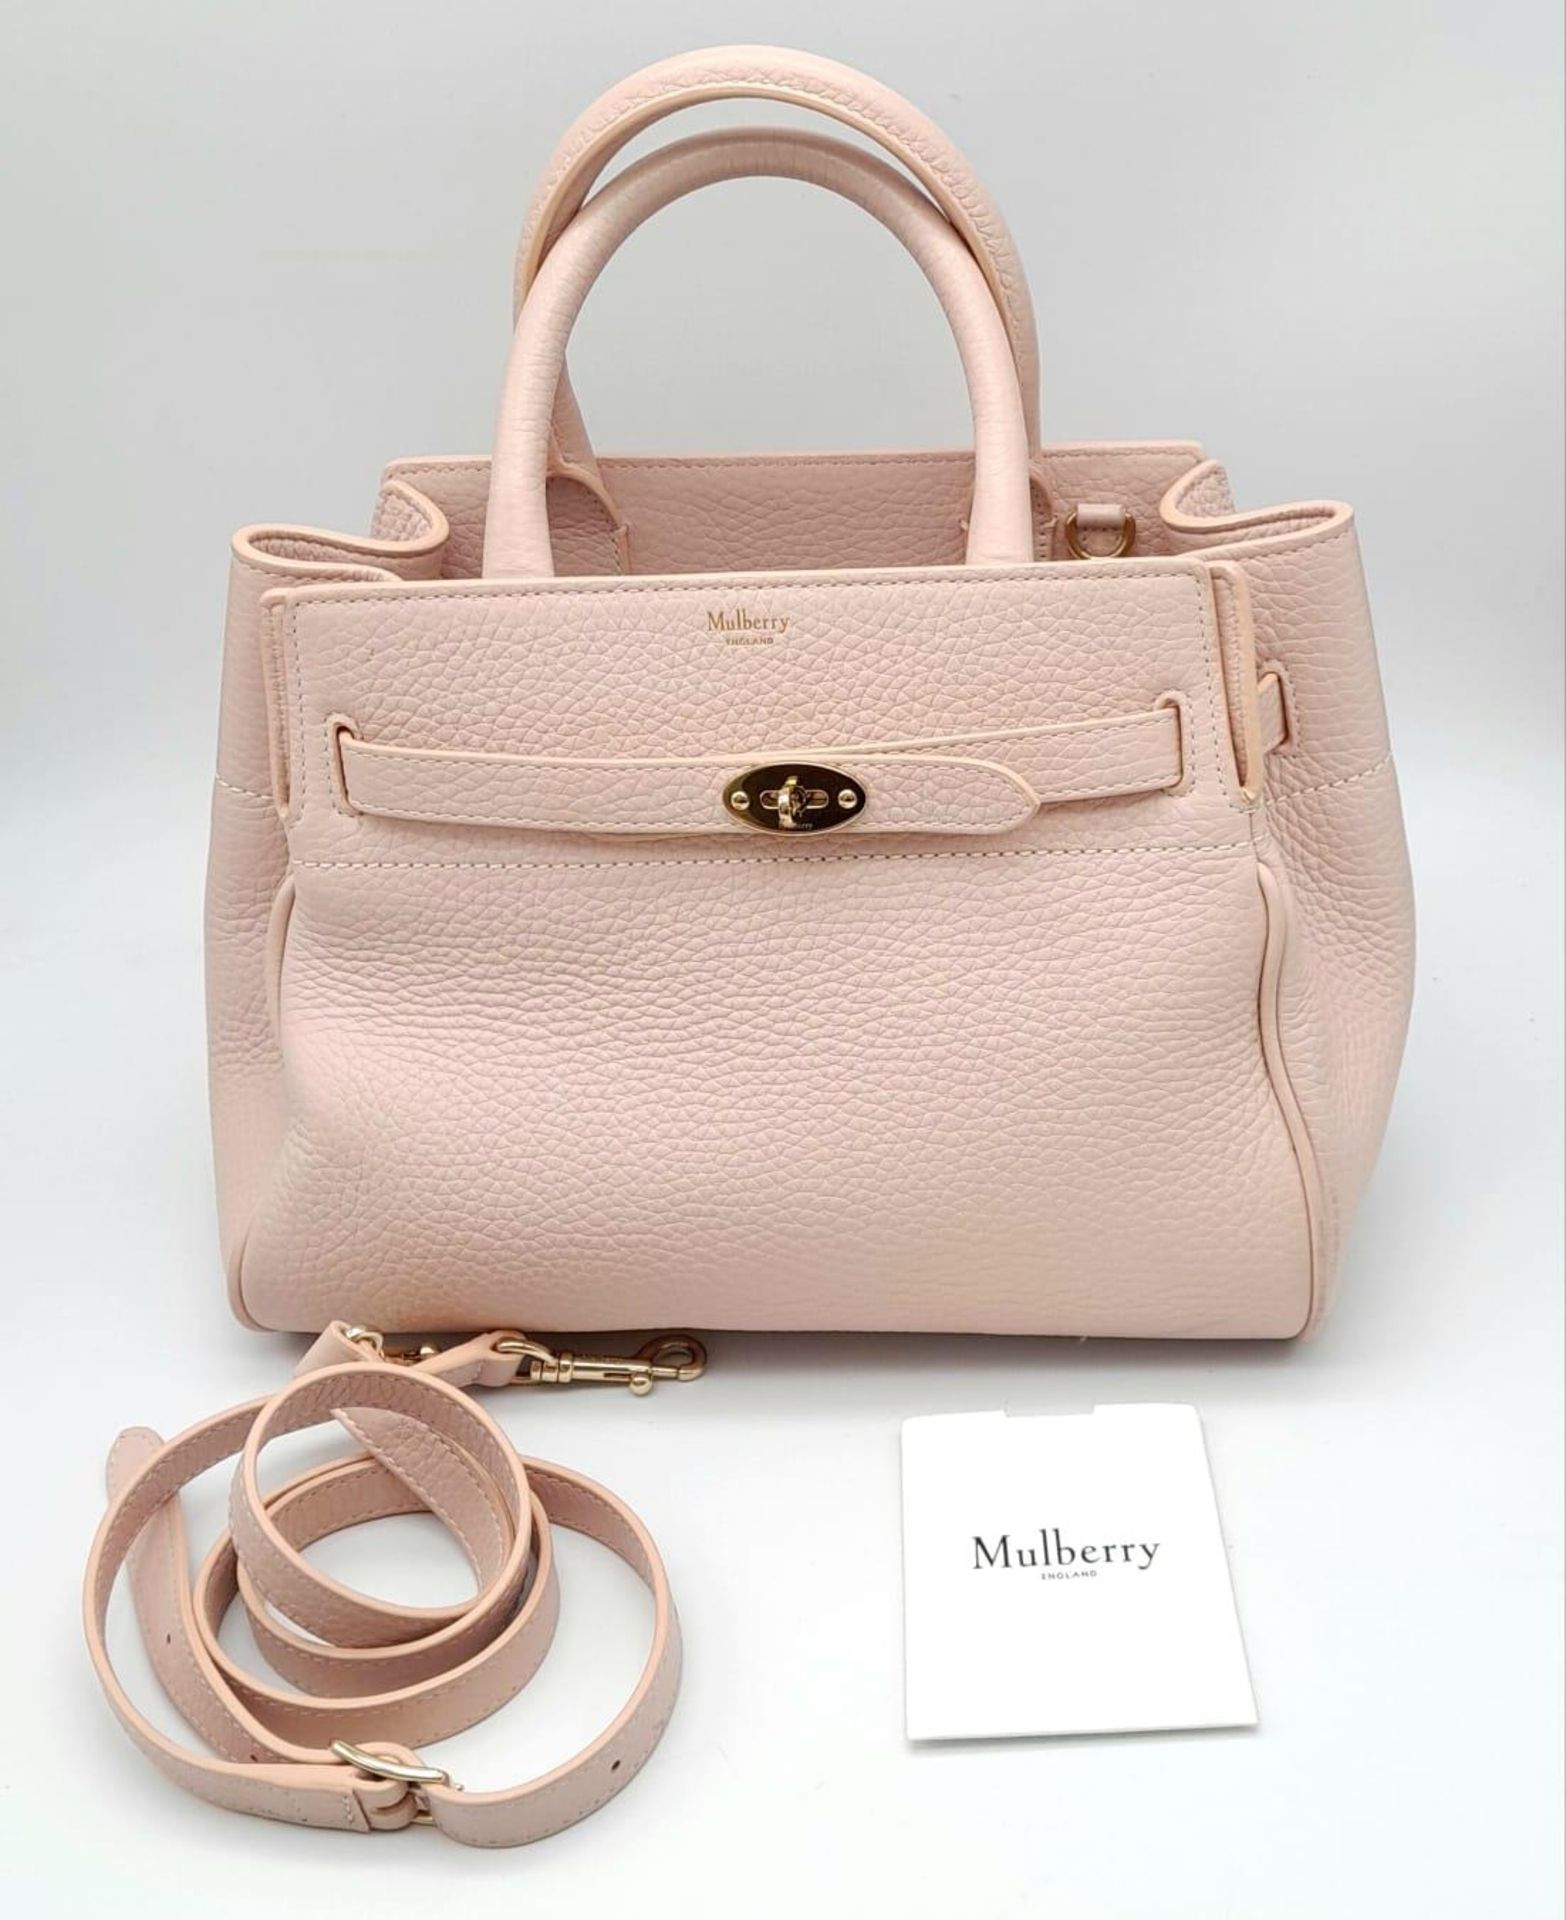 A Mulberry Small Belted Bayswater Handbag in Icy Pink Heavy Grain with Pastel Tartan Fabric